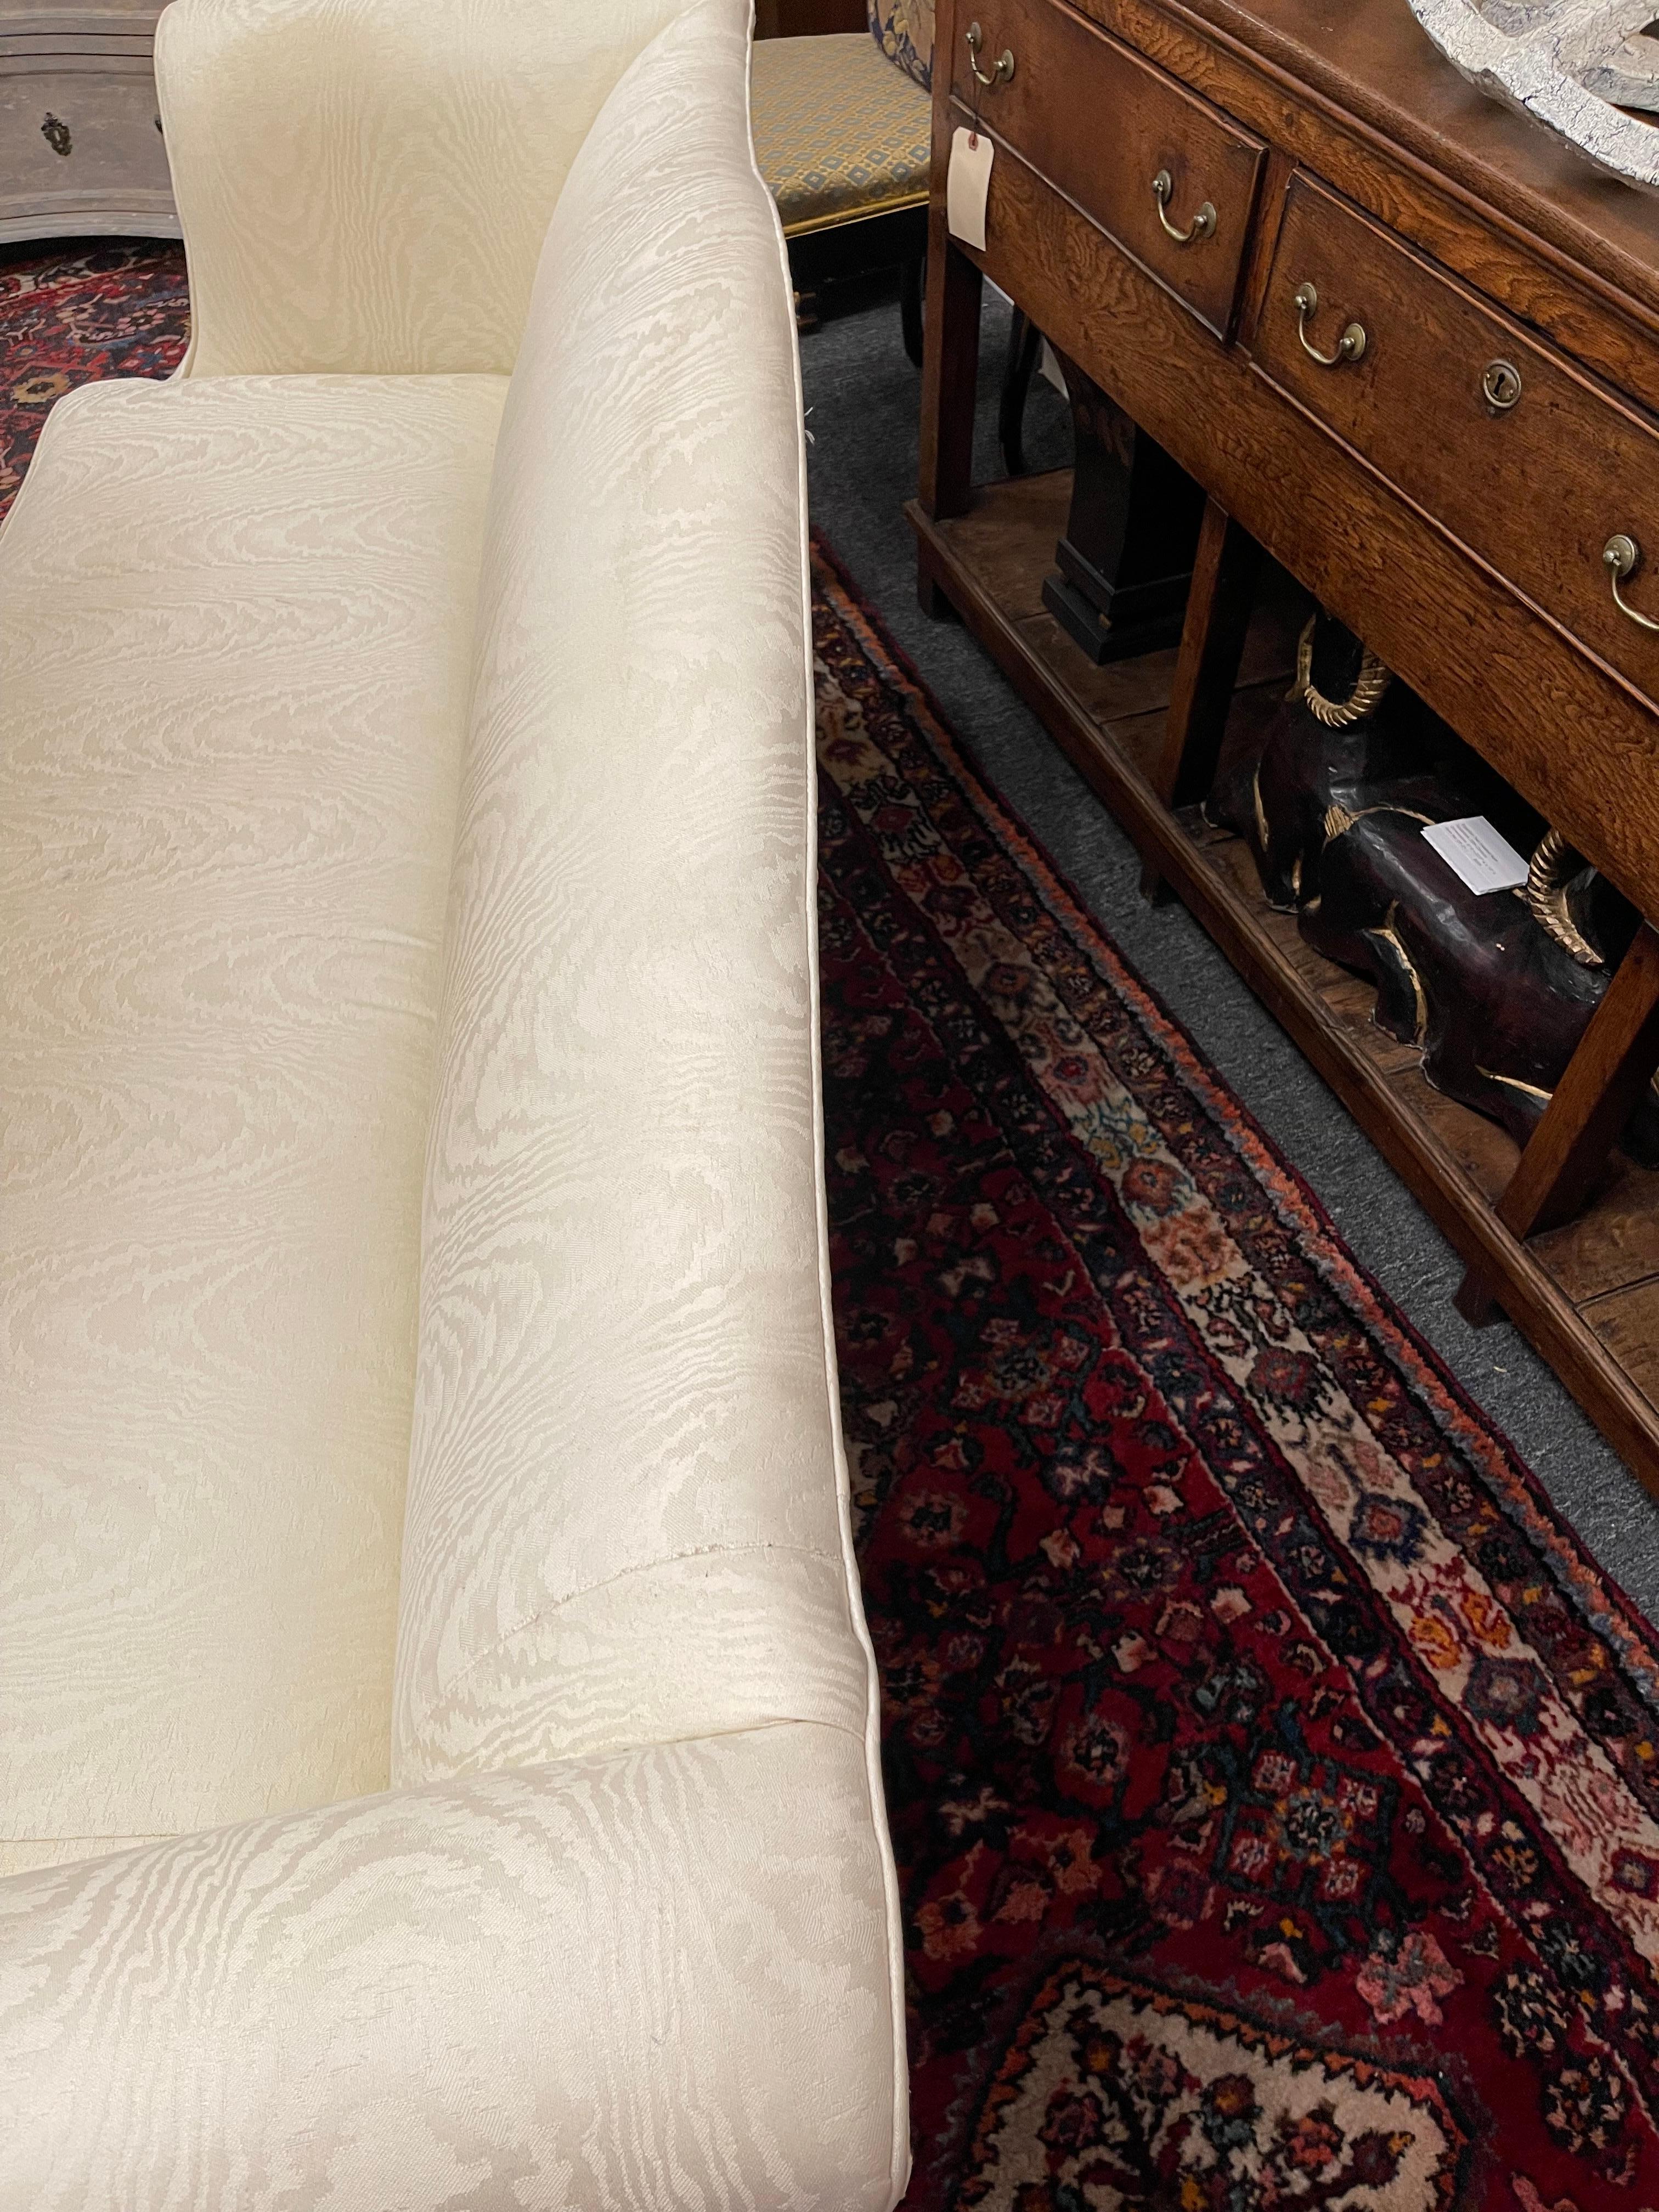 Mahogany Chippendale Style Camelback Sofa with a Single Seat Cushion, 20th Century For Sale